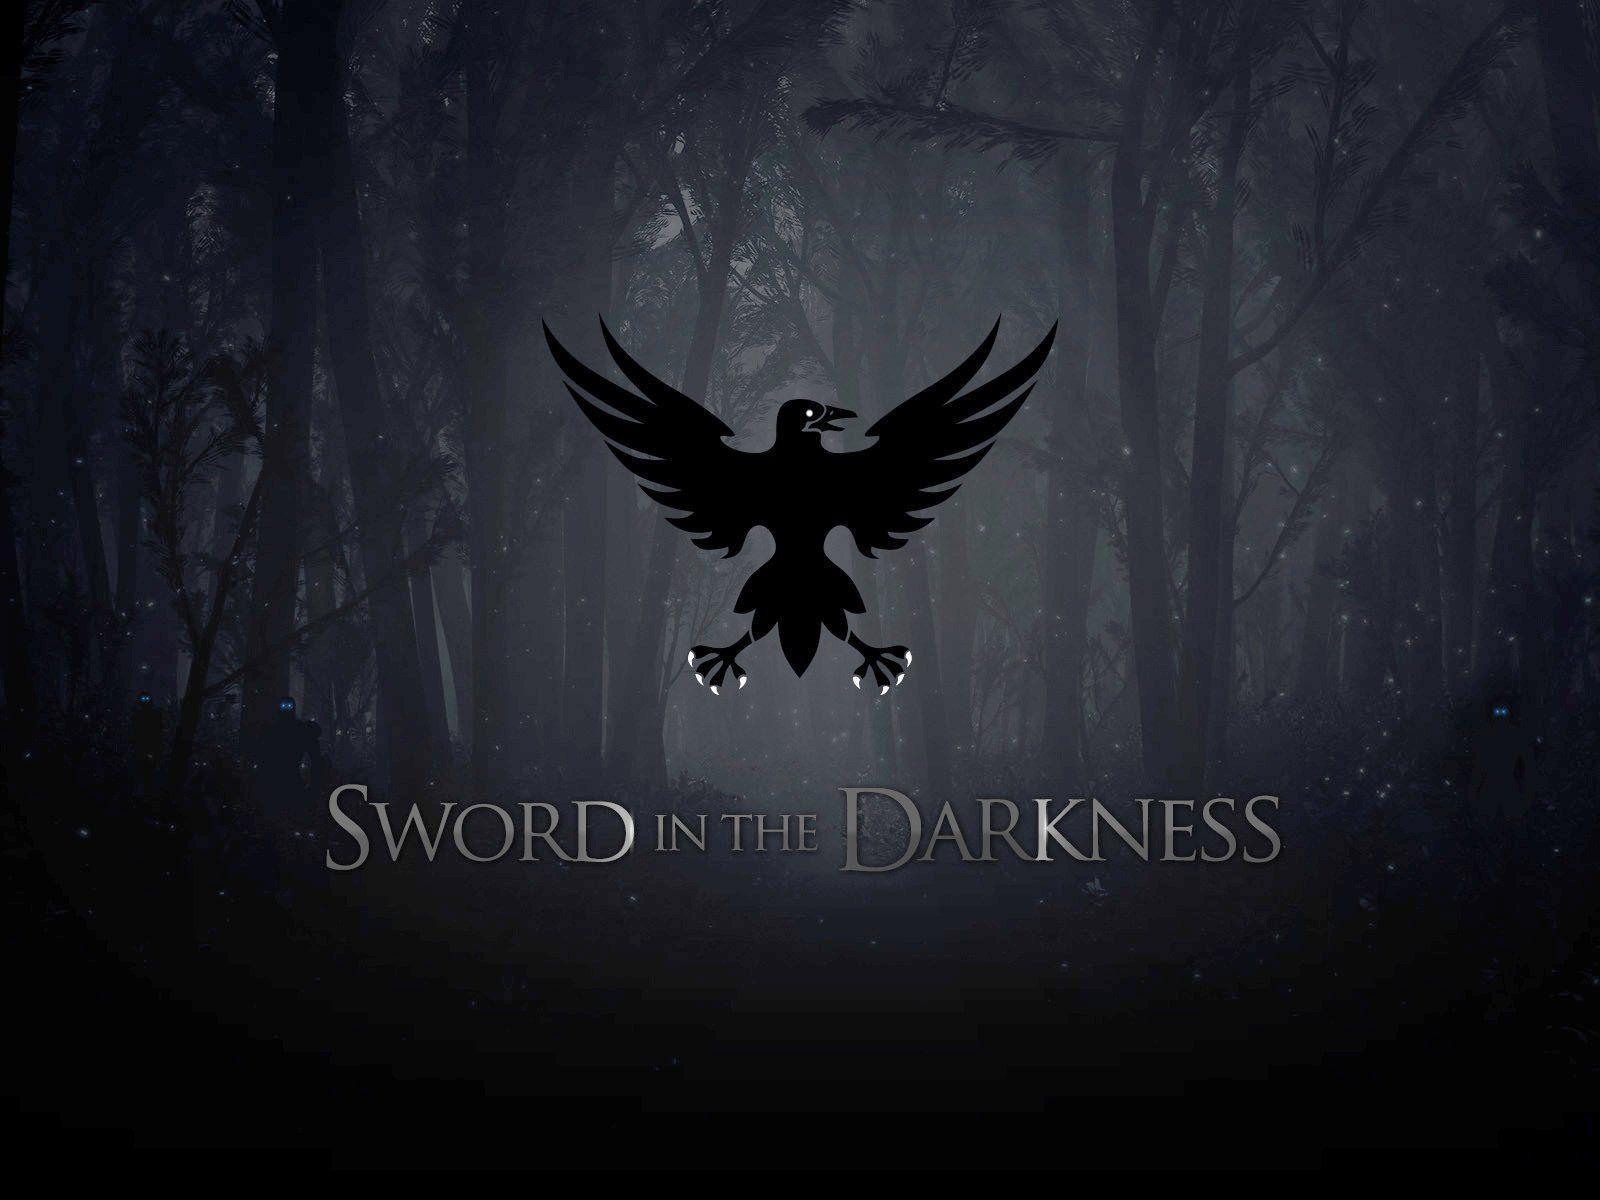 Similiar HBO Game Of Thrones Wallpapers Keywords